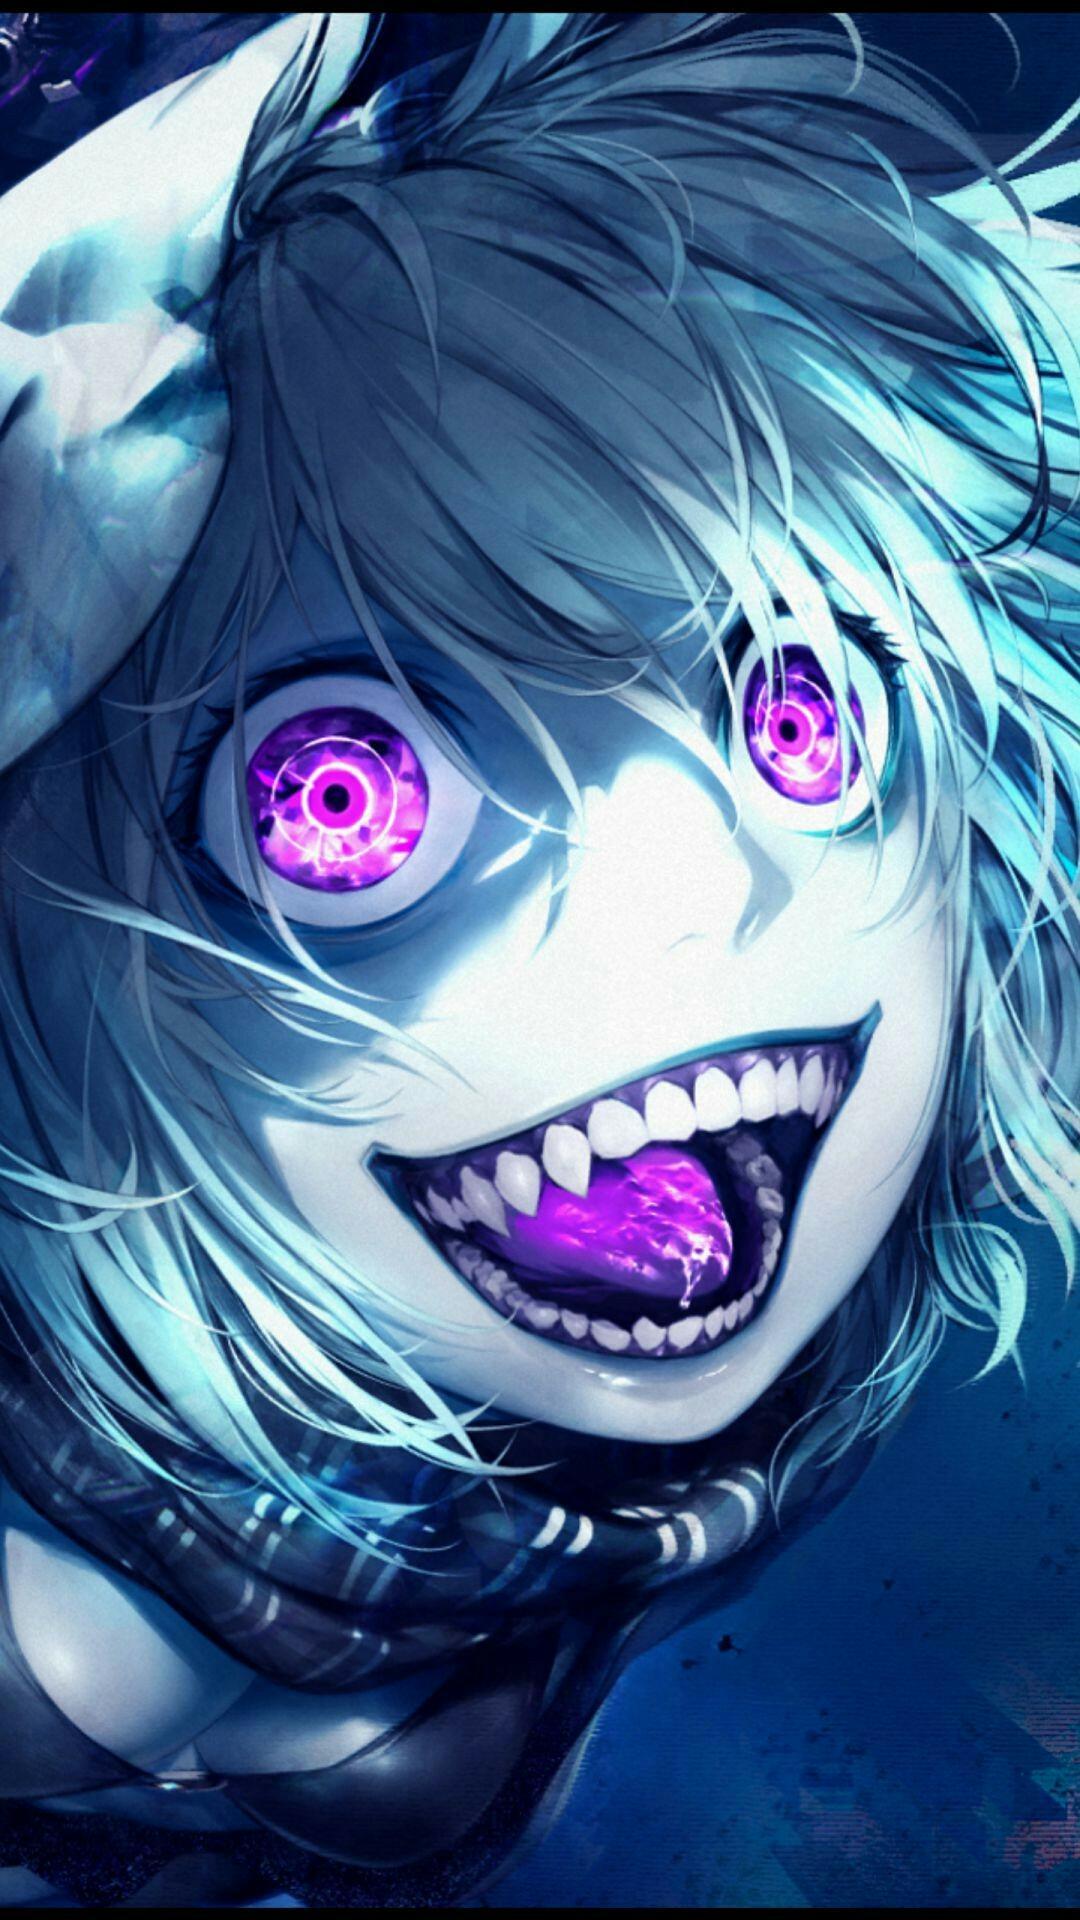 4K AMOLED Anime Wallpaper for Android - APK Download